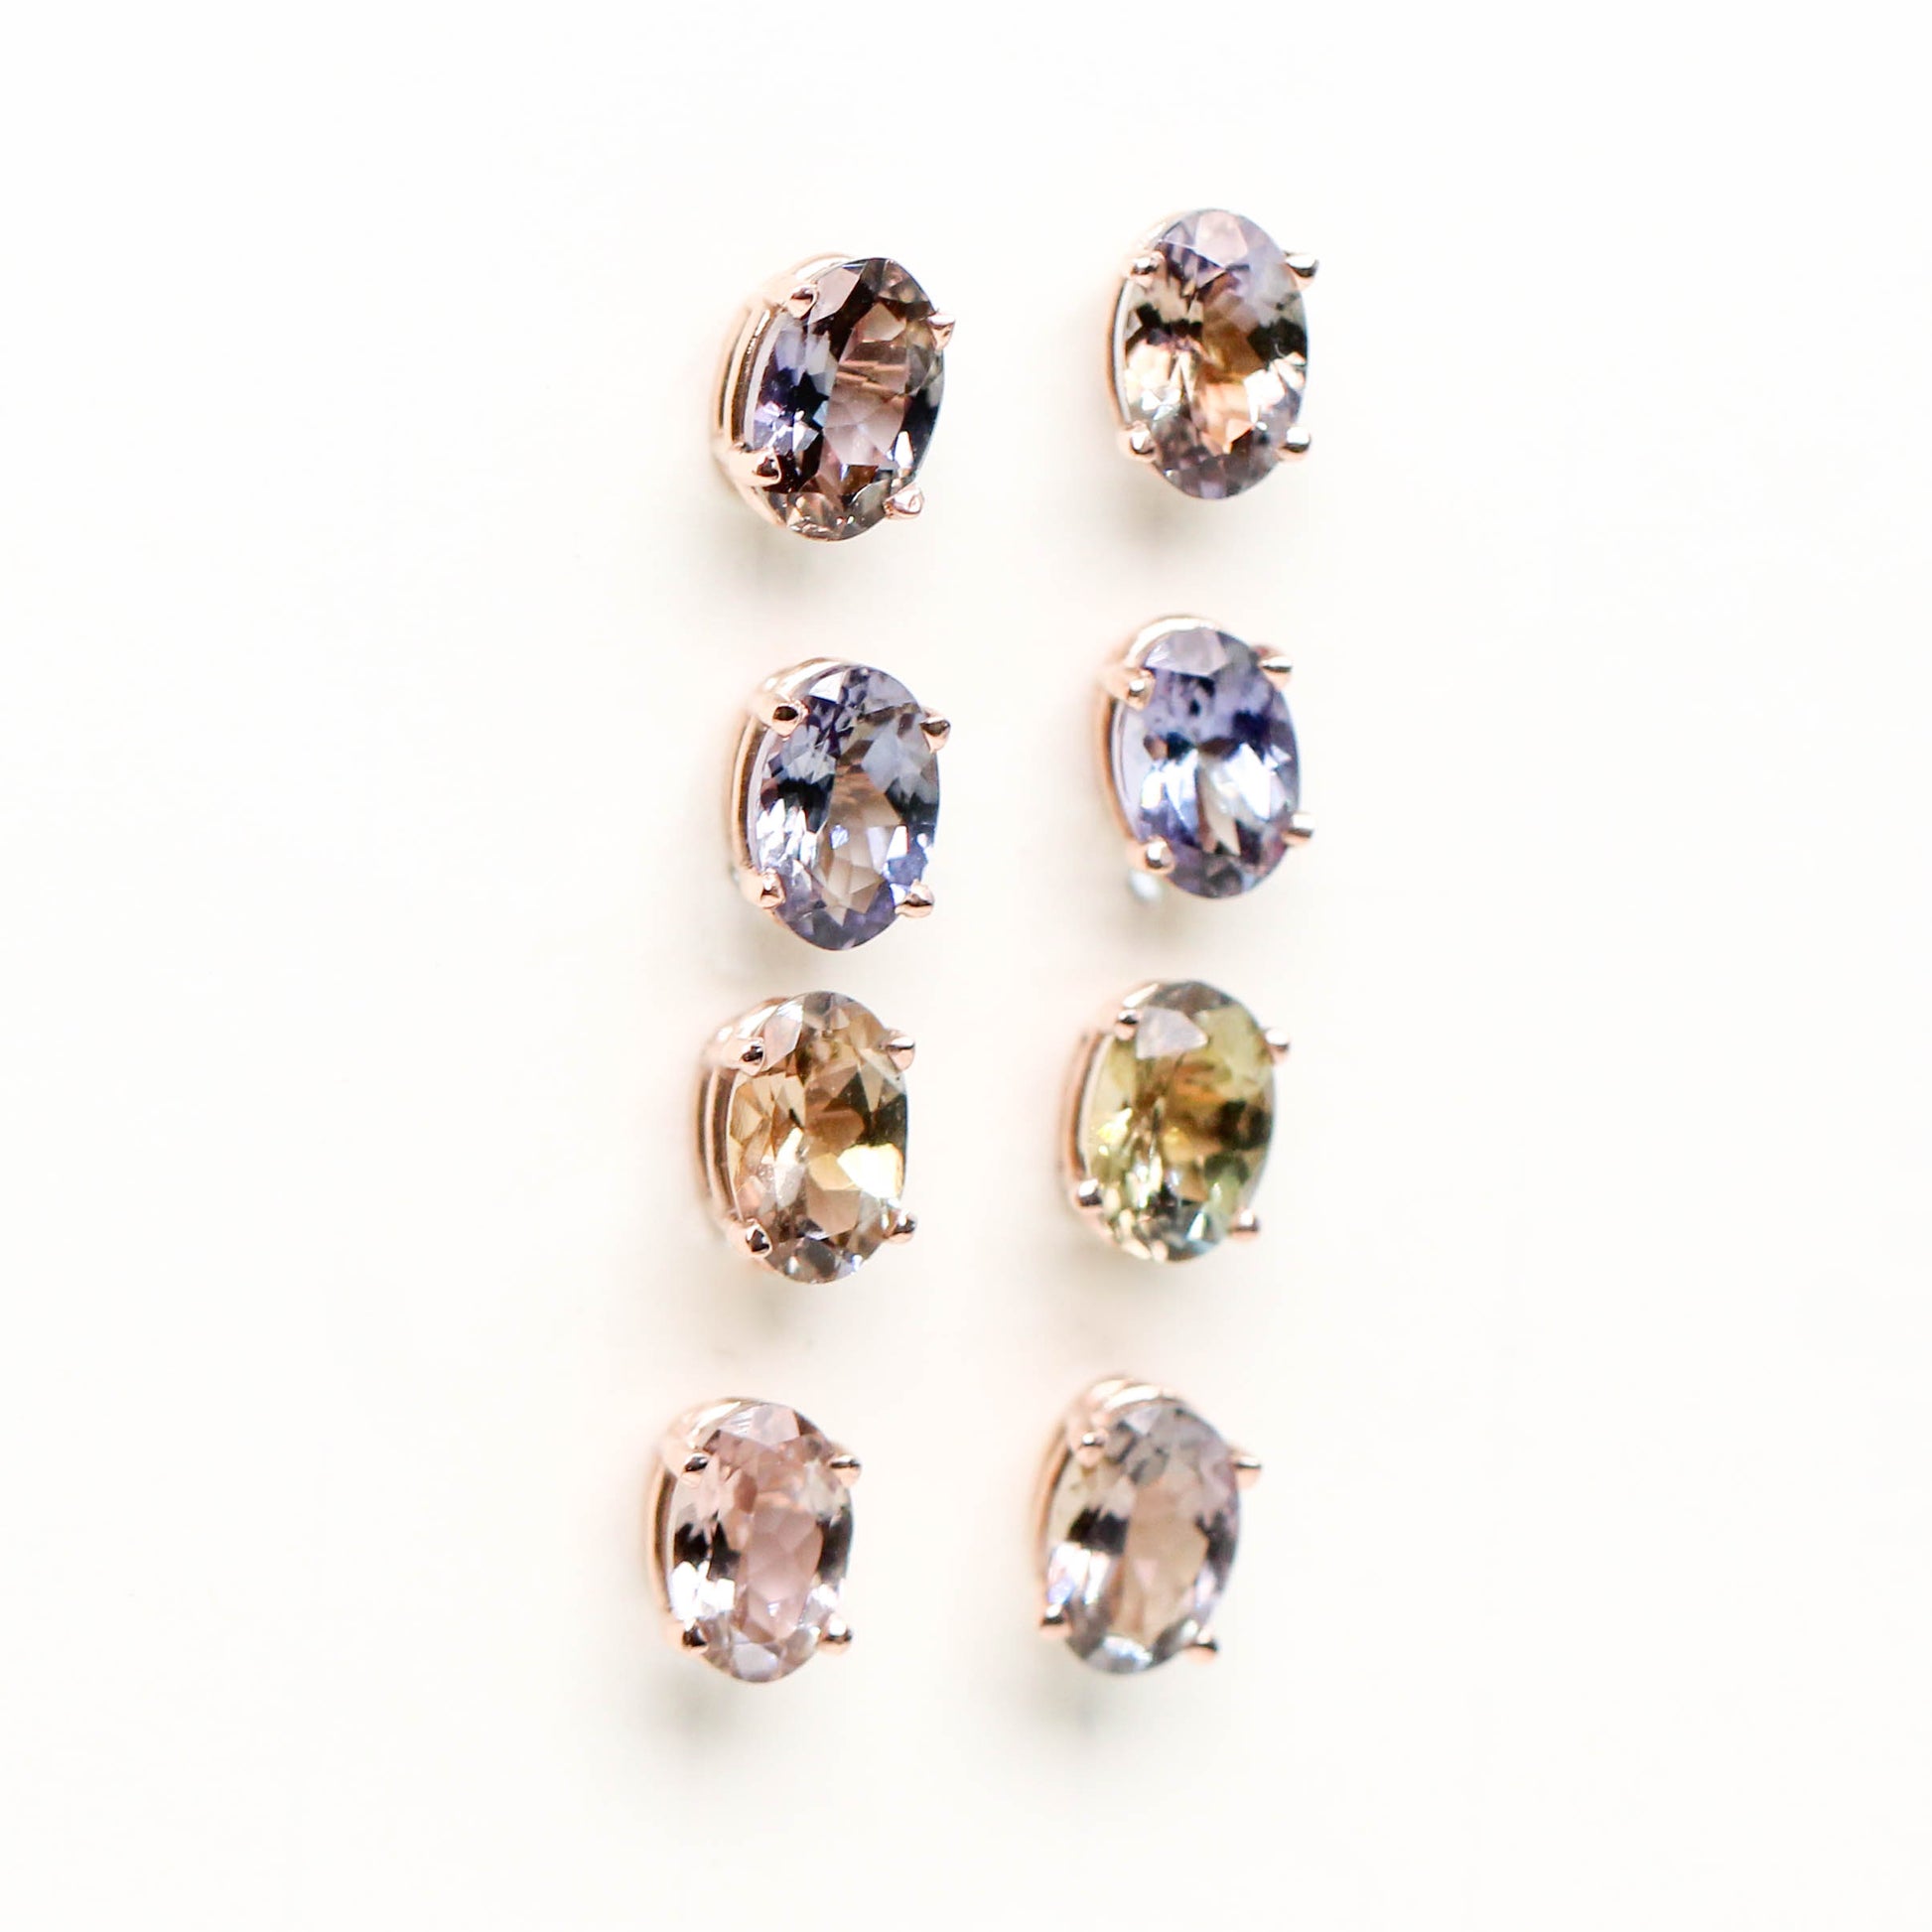 Oval Sapphire Earrings in 14k Rose Gold - Choose Your Pair - Midwinter Co. Alternative Bridal Rings and Modern Fine Jewelry